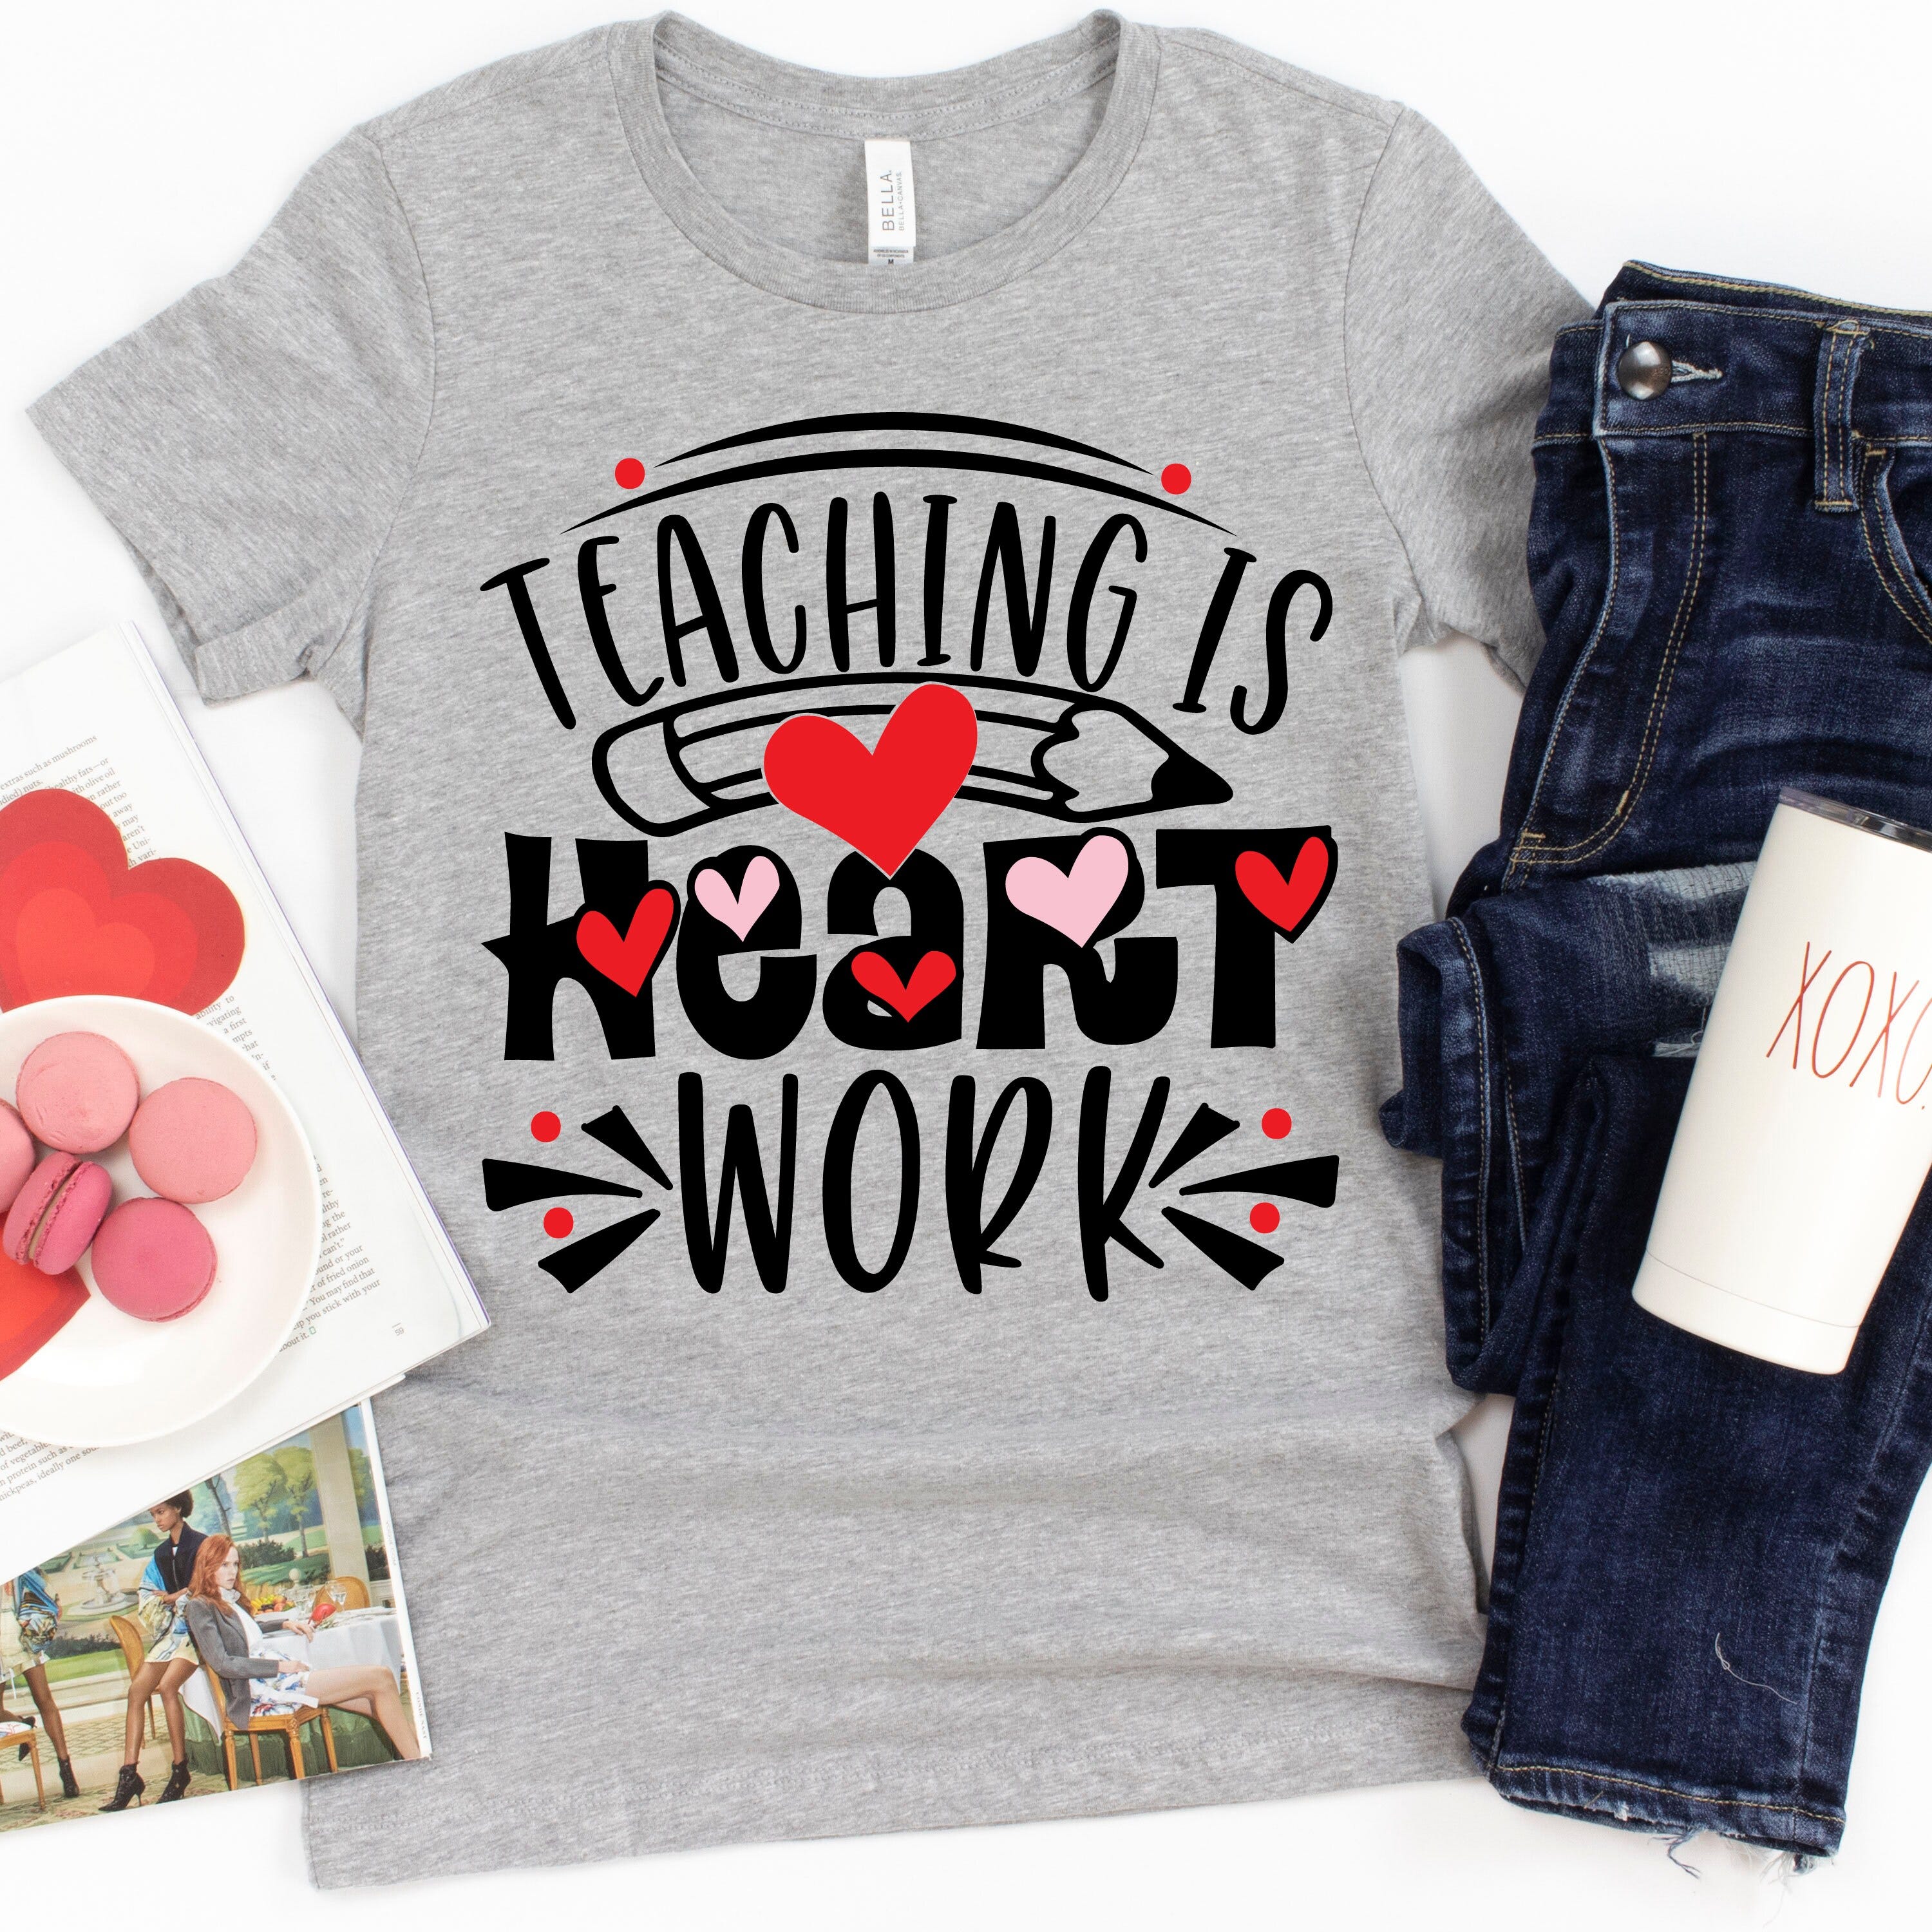 Teaching is heart work SVG cutting files, Teacher SVG, Love SVG, CriCut Files, svg jpg png dxf ,Silhouette cameo, Sublimation design